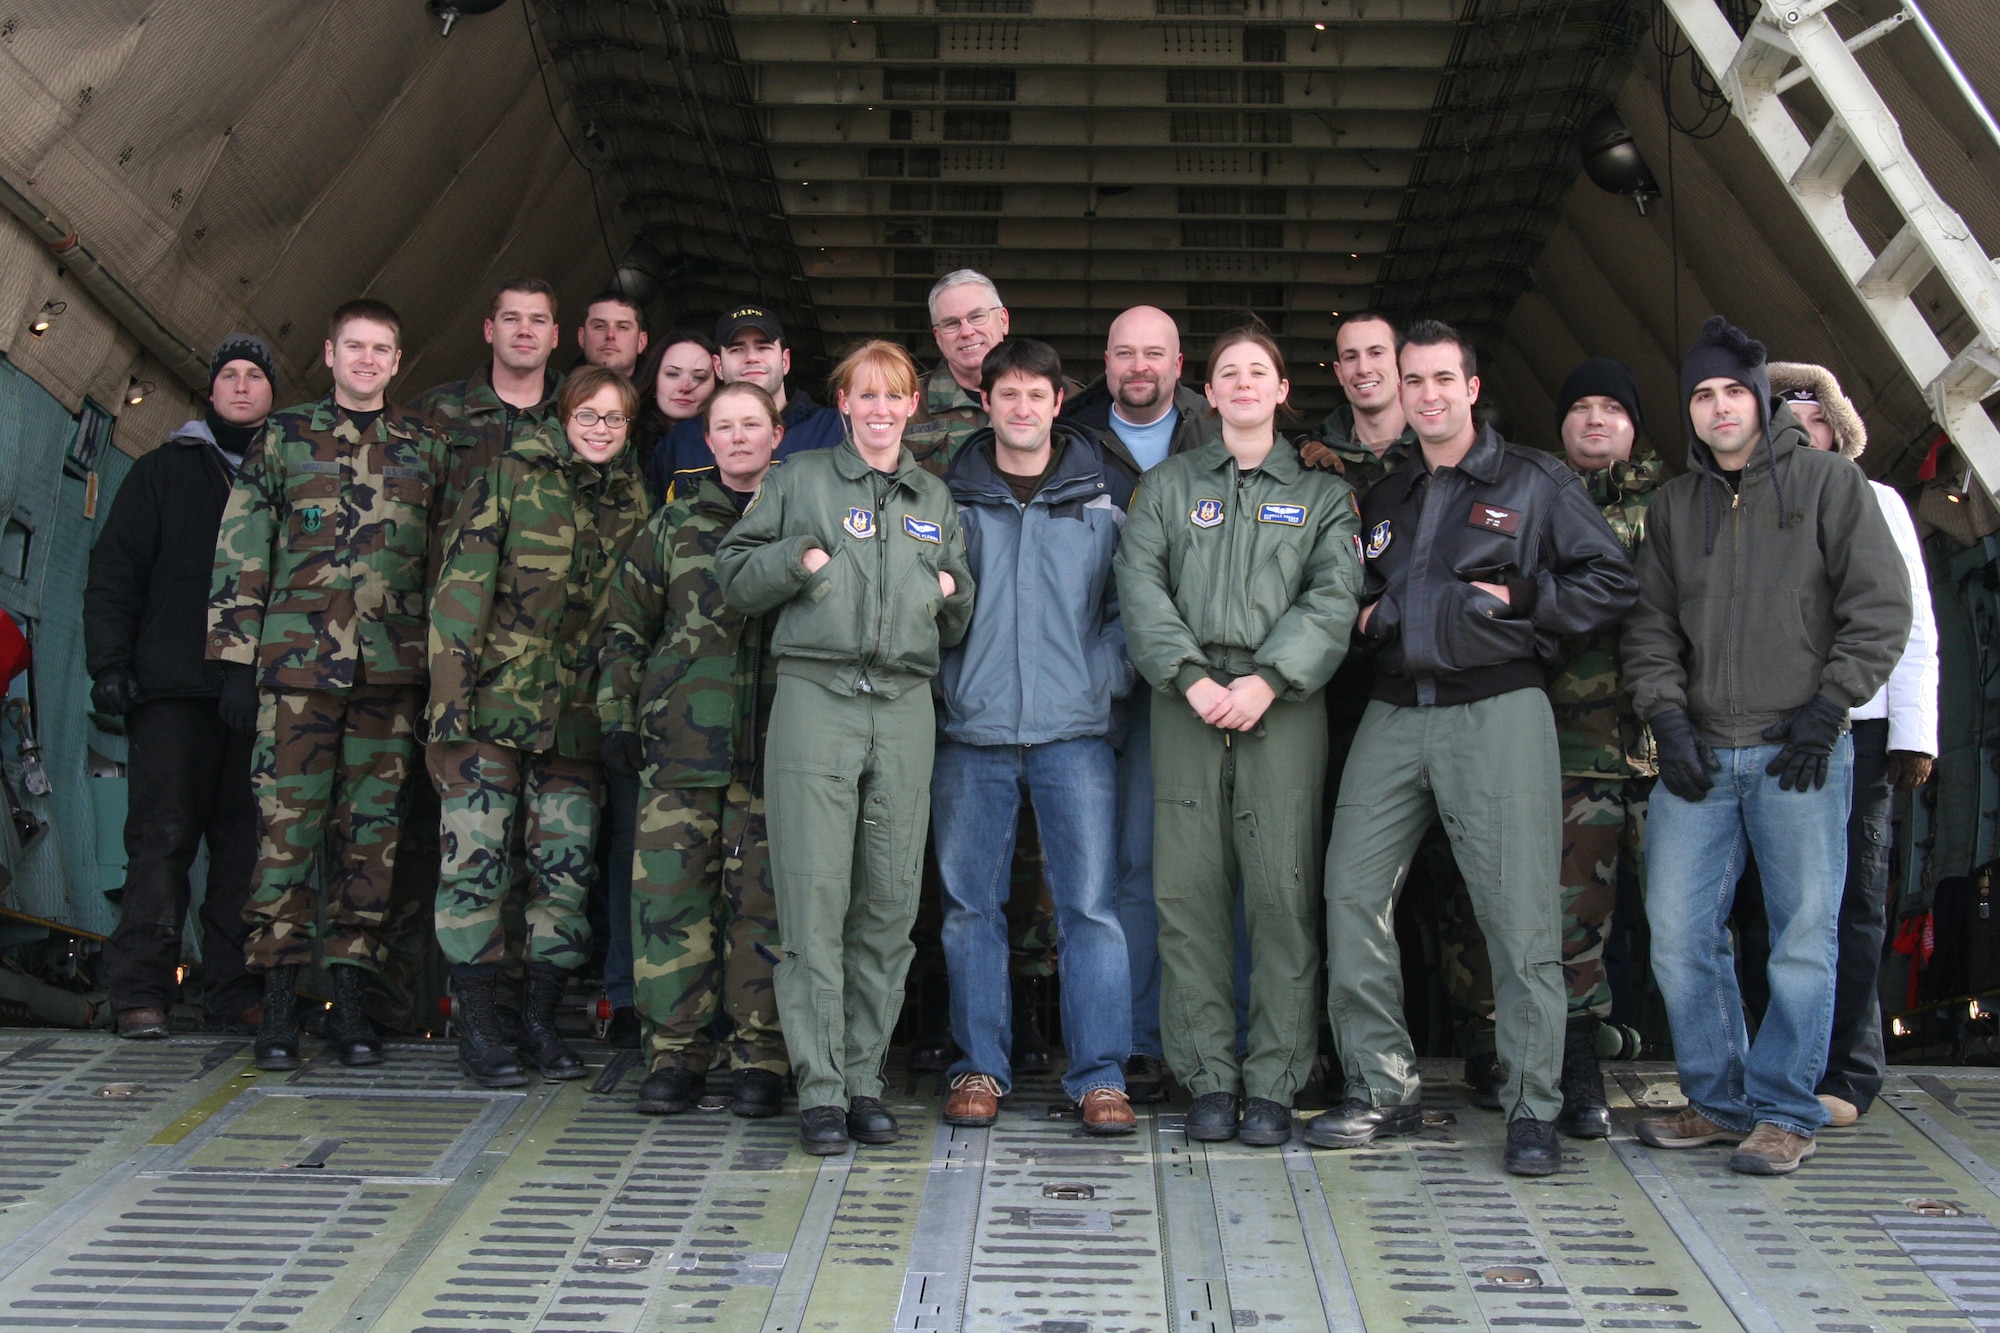 WRIGHT-PATTERSON AFB, Ohio - 445th Airlift Wing members take a moment for a group shot with the Ghost Hunters cast on a C-5. The popular Sci Fi Channel T.V. show Ghost Hunters is filming their show in several buildings at Wright-Patterson AFB and filmed some footage of the 445th Airlift Wing's C-5 Galaxy Jan. 15, 2008, to help enhance the Air Force base setting for the show. (U.S. Air Force photo/Laura Darden)